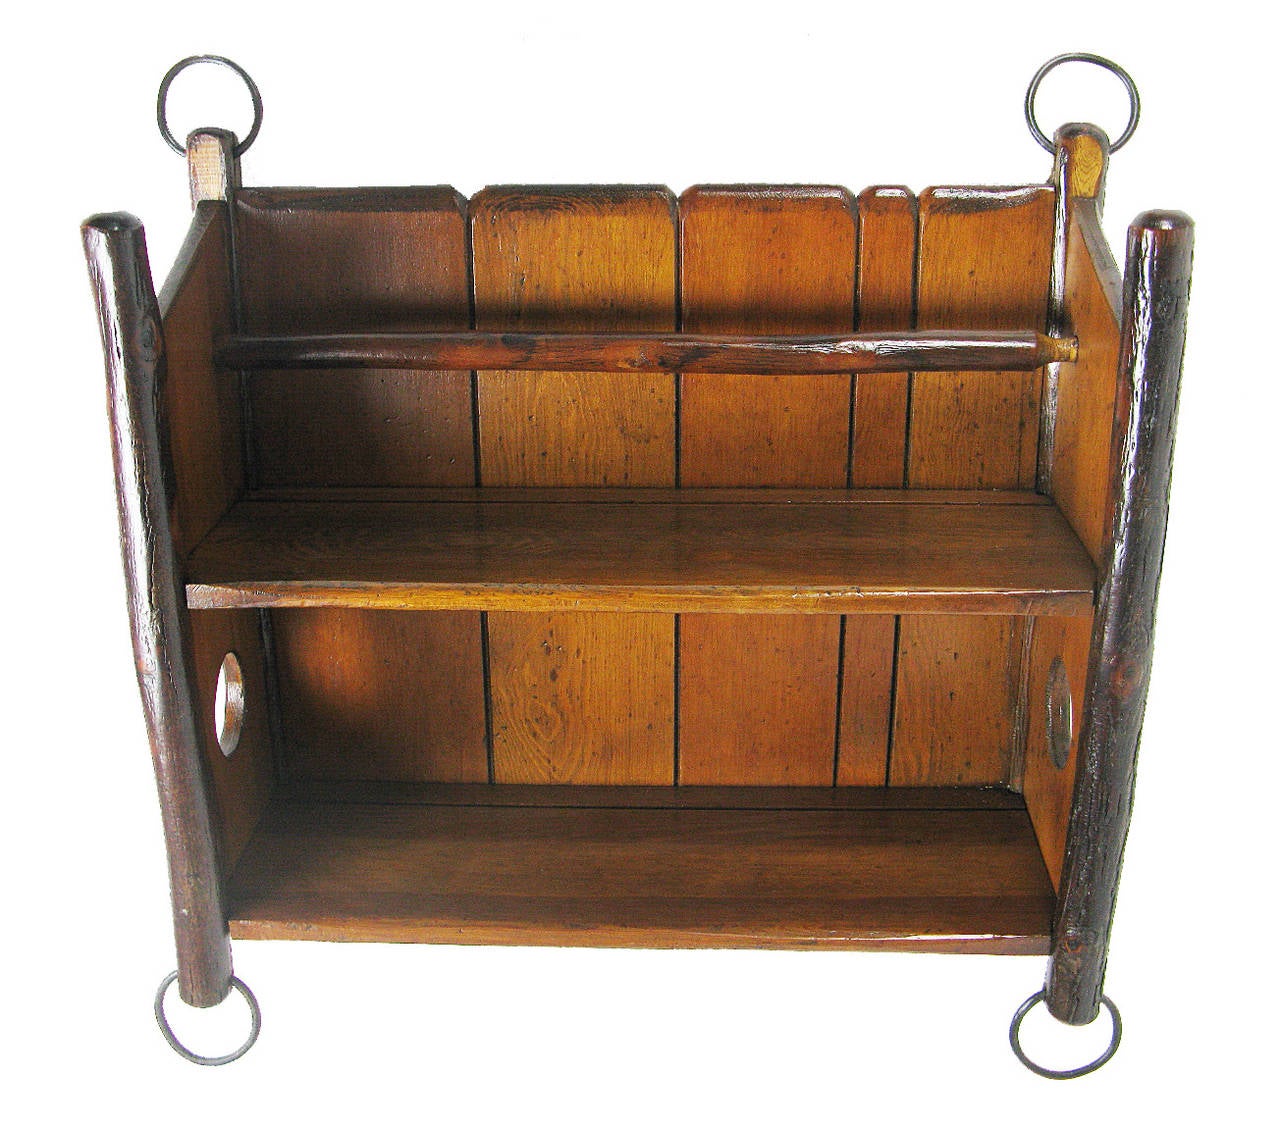 This uncommon hanging shelf has hickory pole uprights and pine slat backs, shelves and sides. There are two iron rings on the bottom of the front poles, and two on the top of the back poles. The shelves have plate grooves and a brace rod on the top